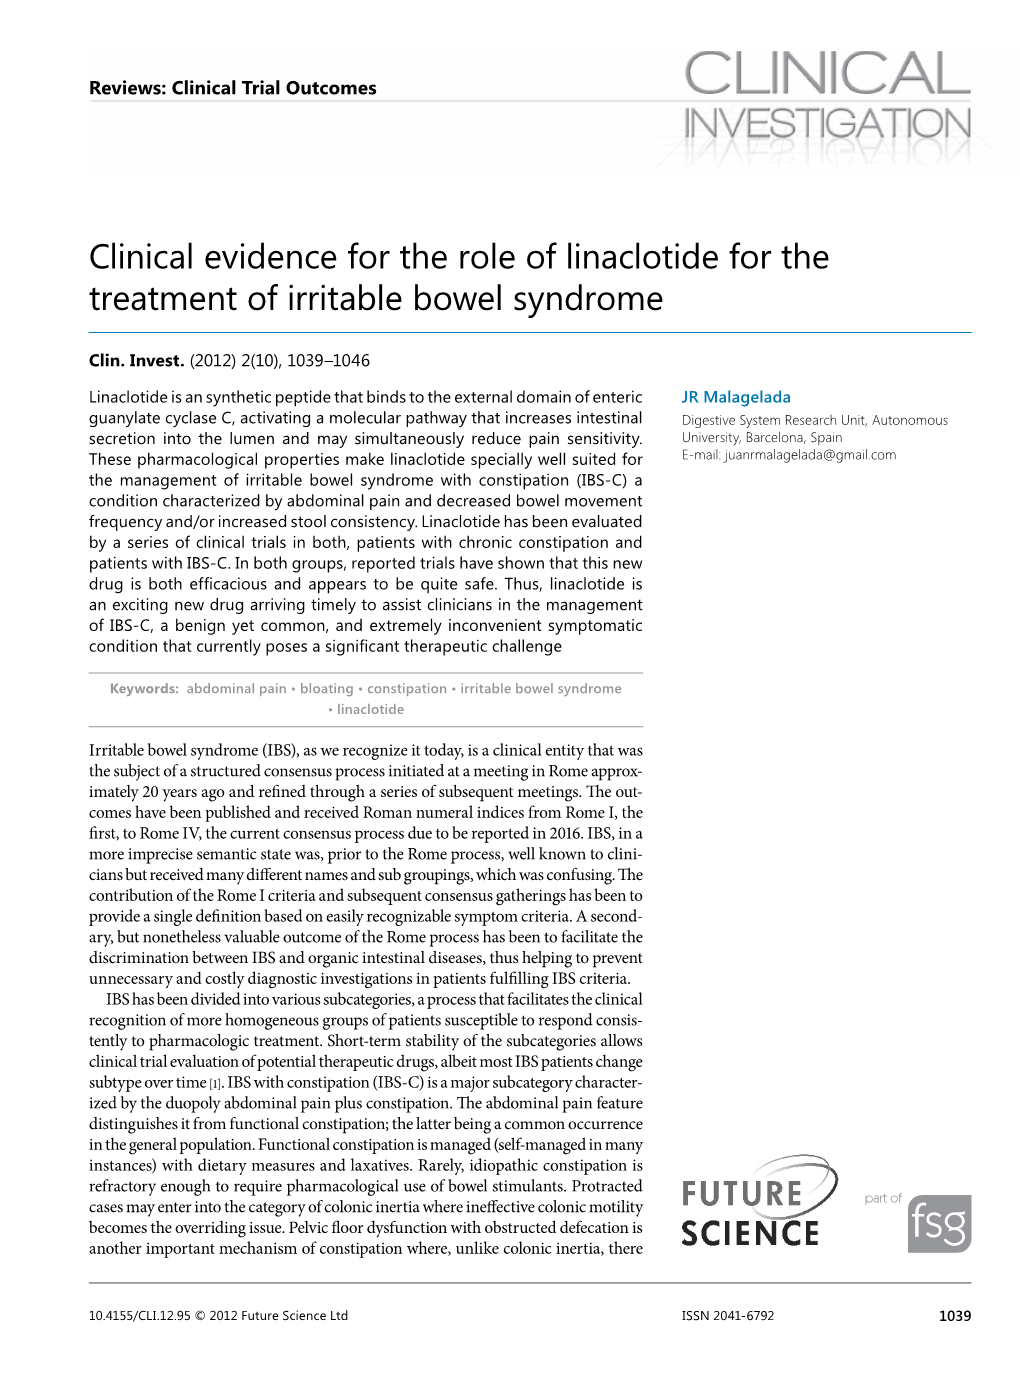 Clinical Evidence for the Role of Linaclotide for the Treatment of Irritable Bowel Syndrome